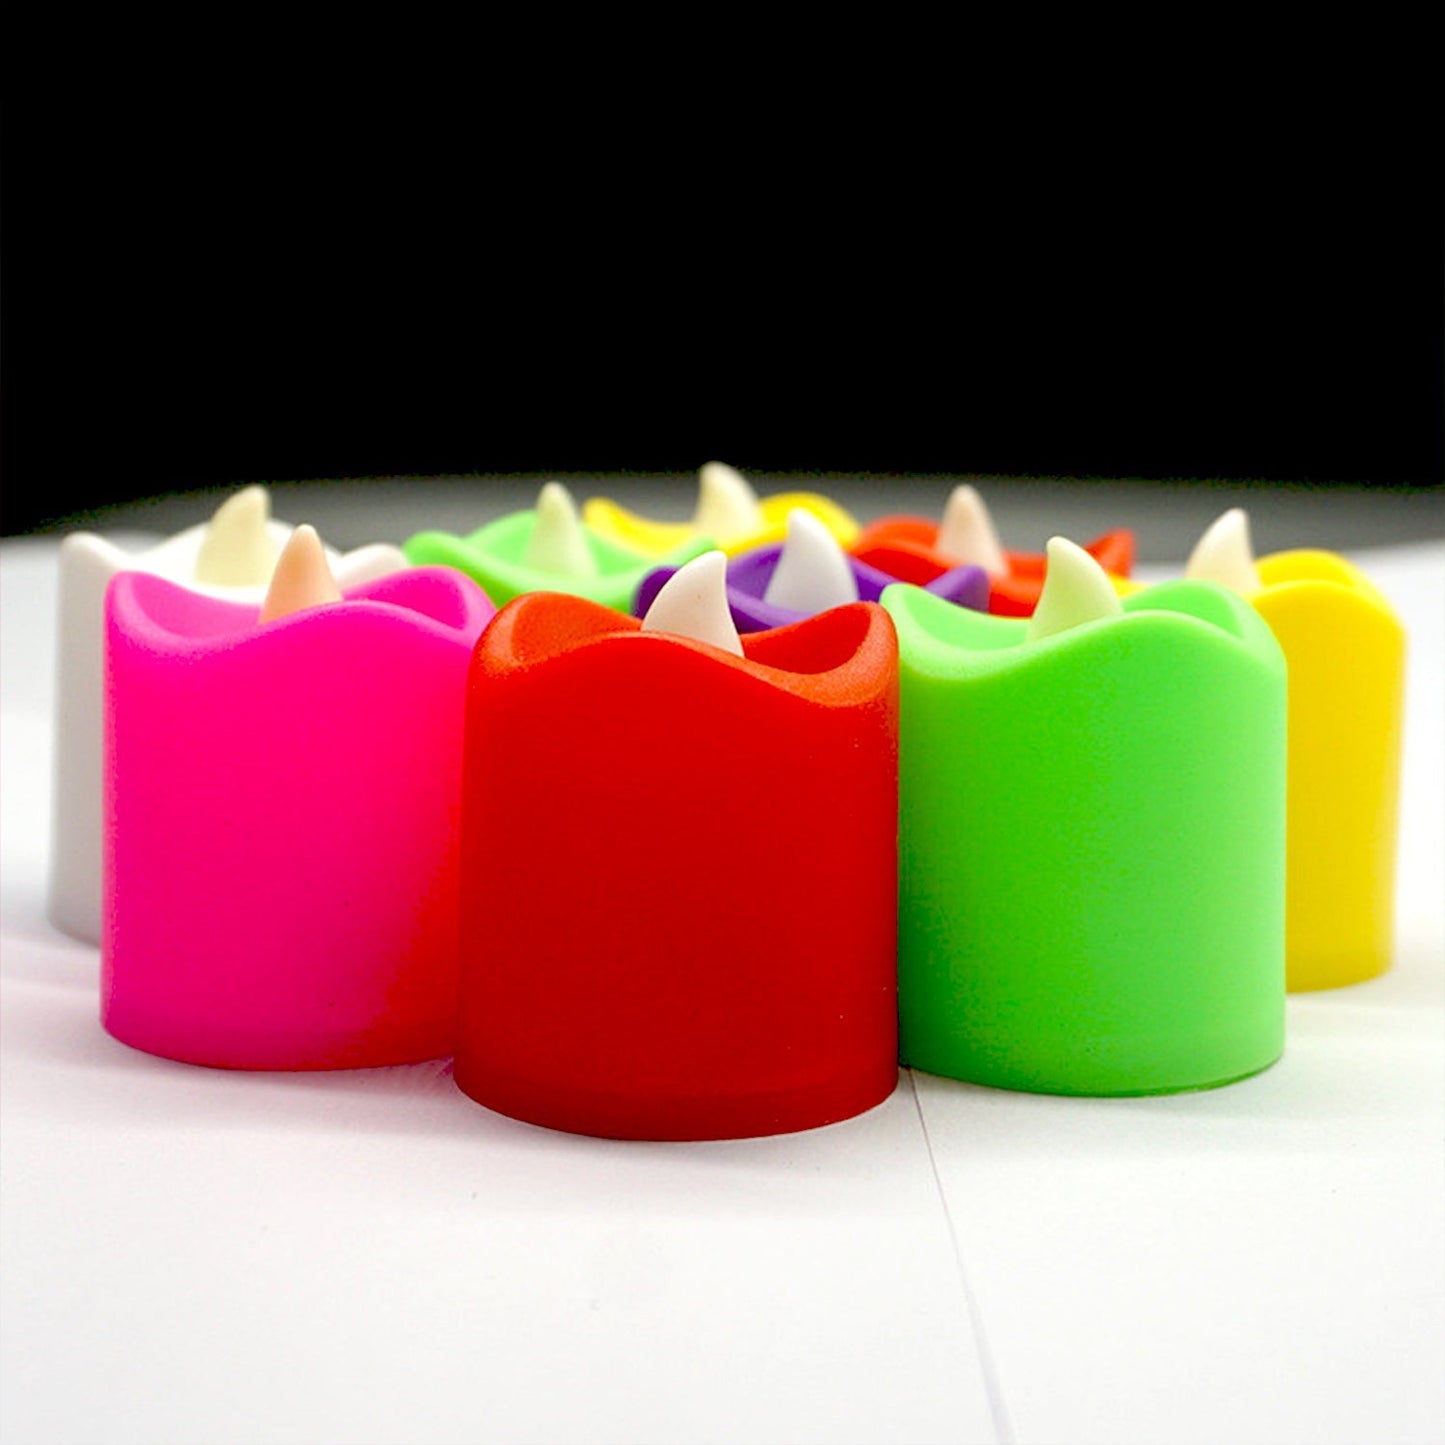 24Pcs Festival Decorative - Led Tealight Candles | Battery Operated Candle Ideal For Party, Wedding, Birthday, Gifts (Multi Color)